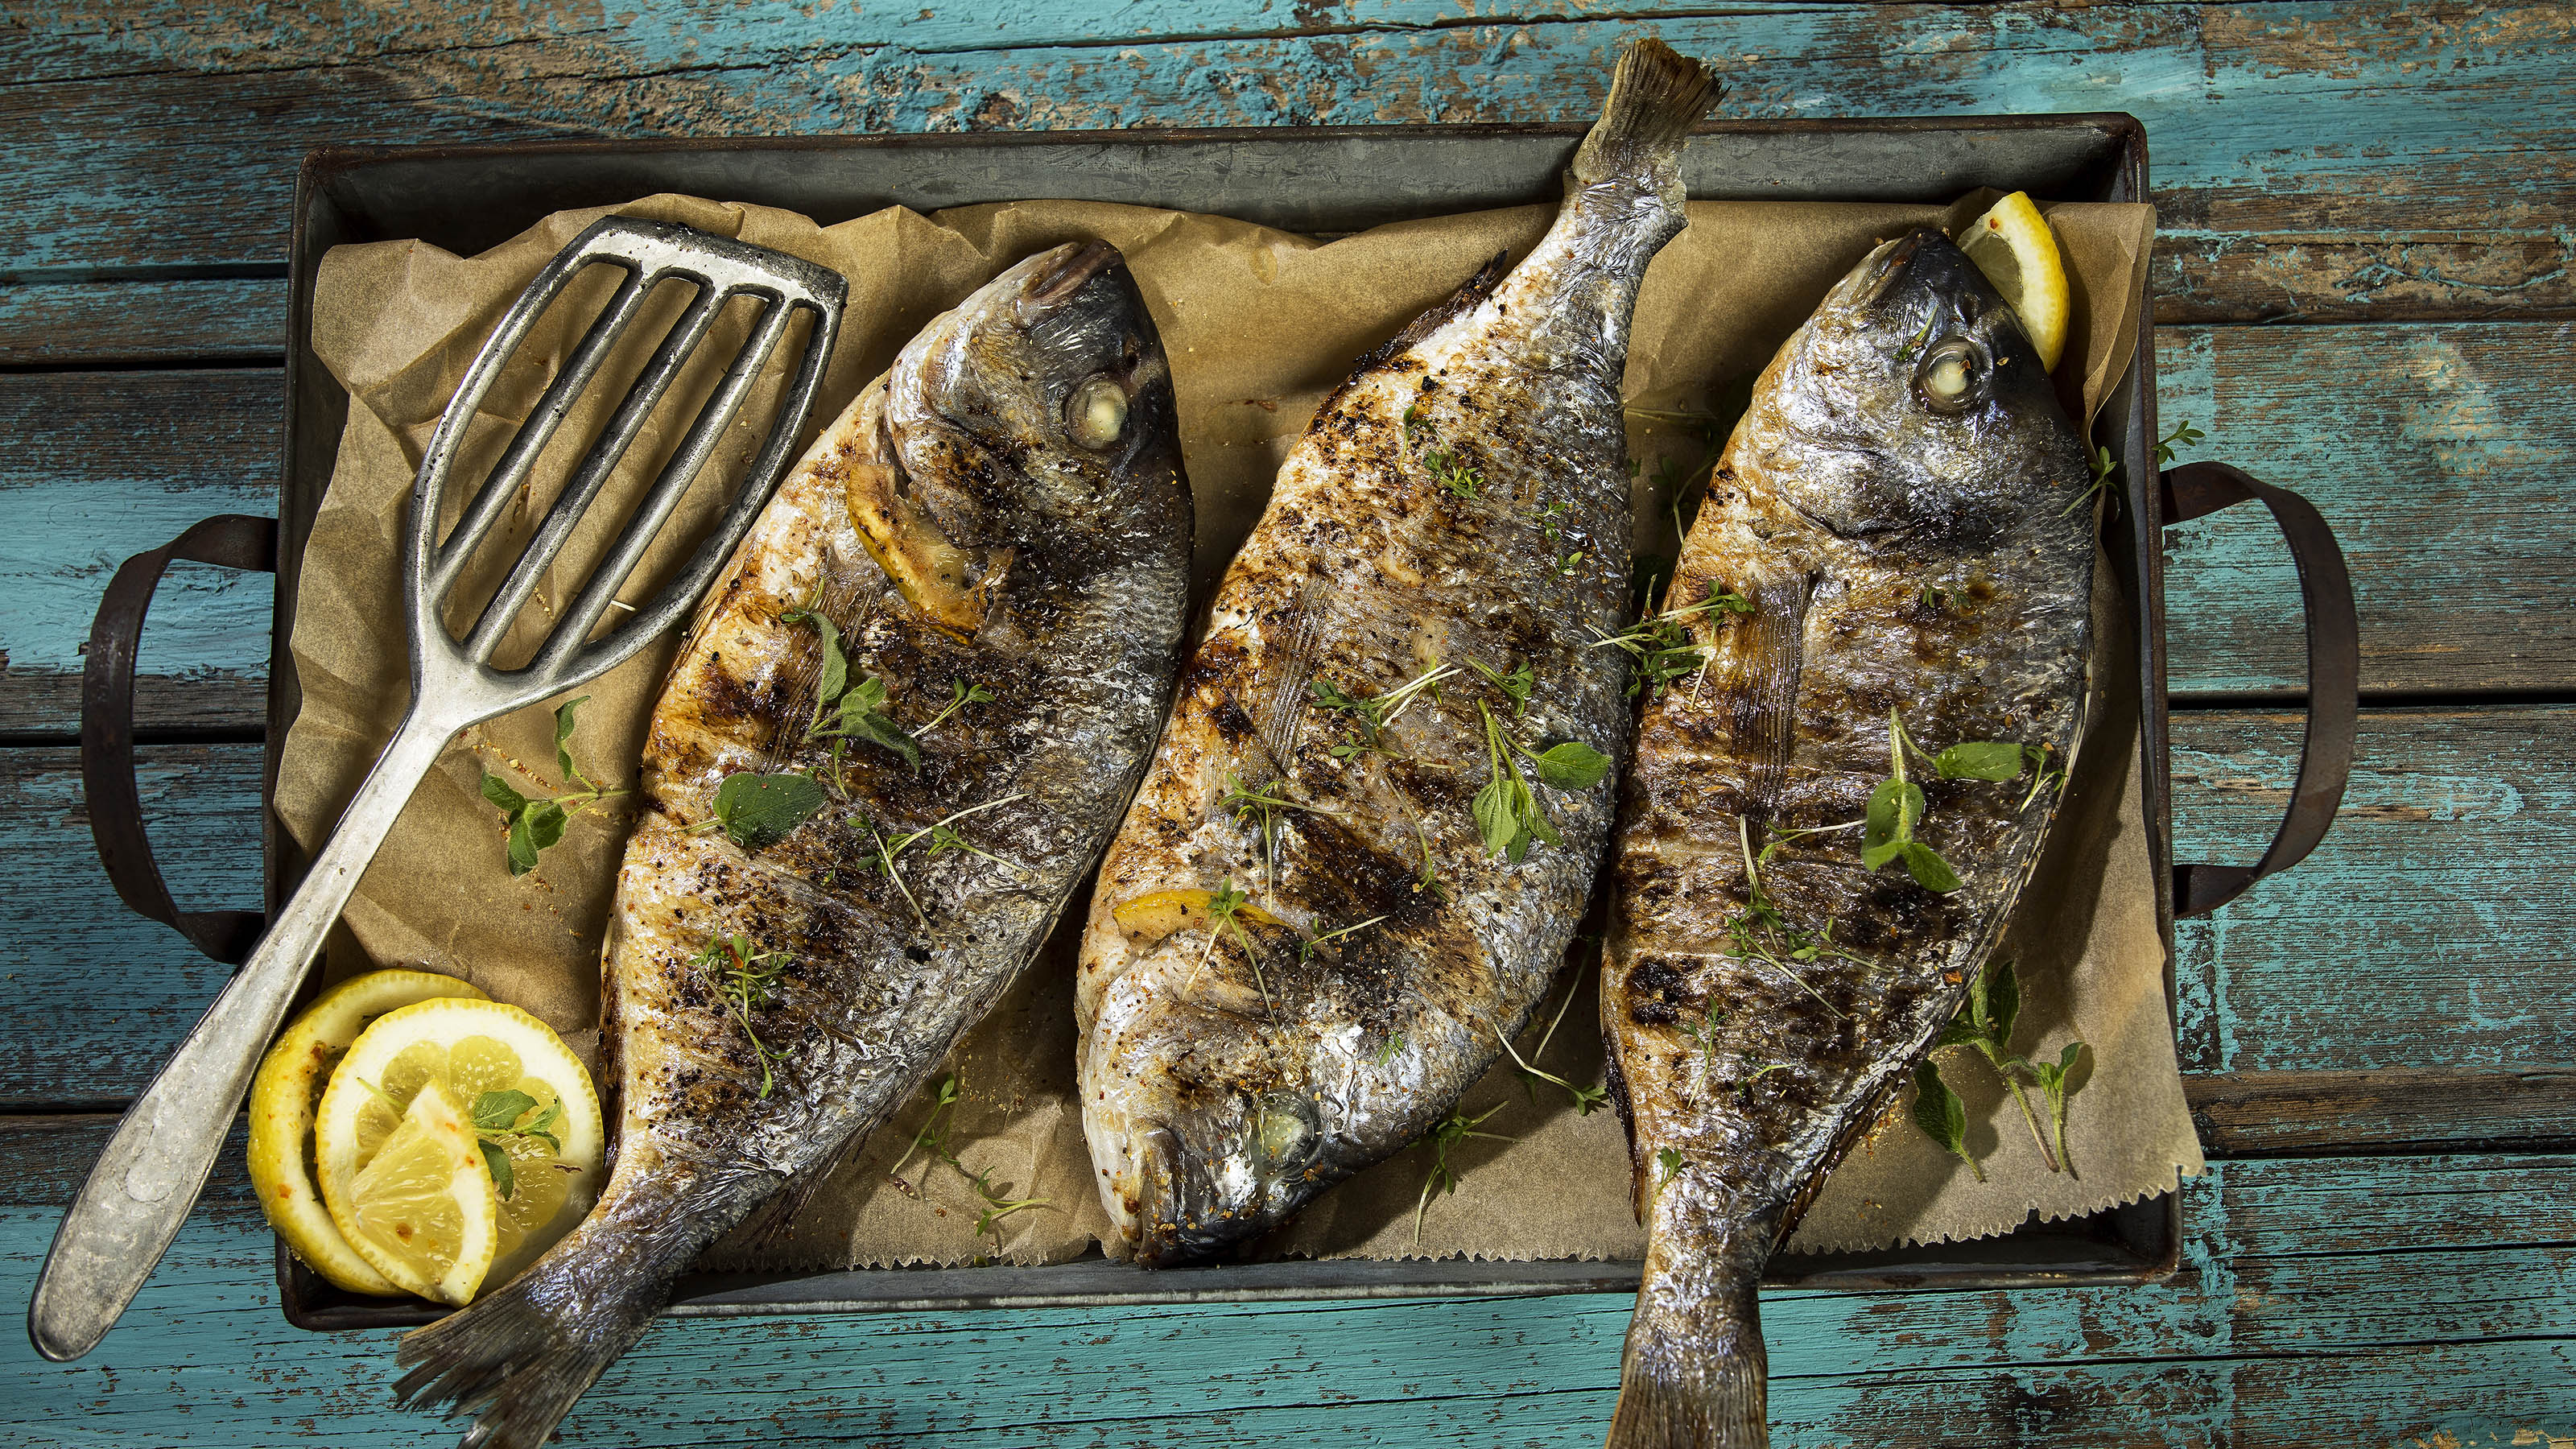 Grilling fish on the BBQ: everything you need to know